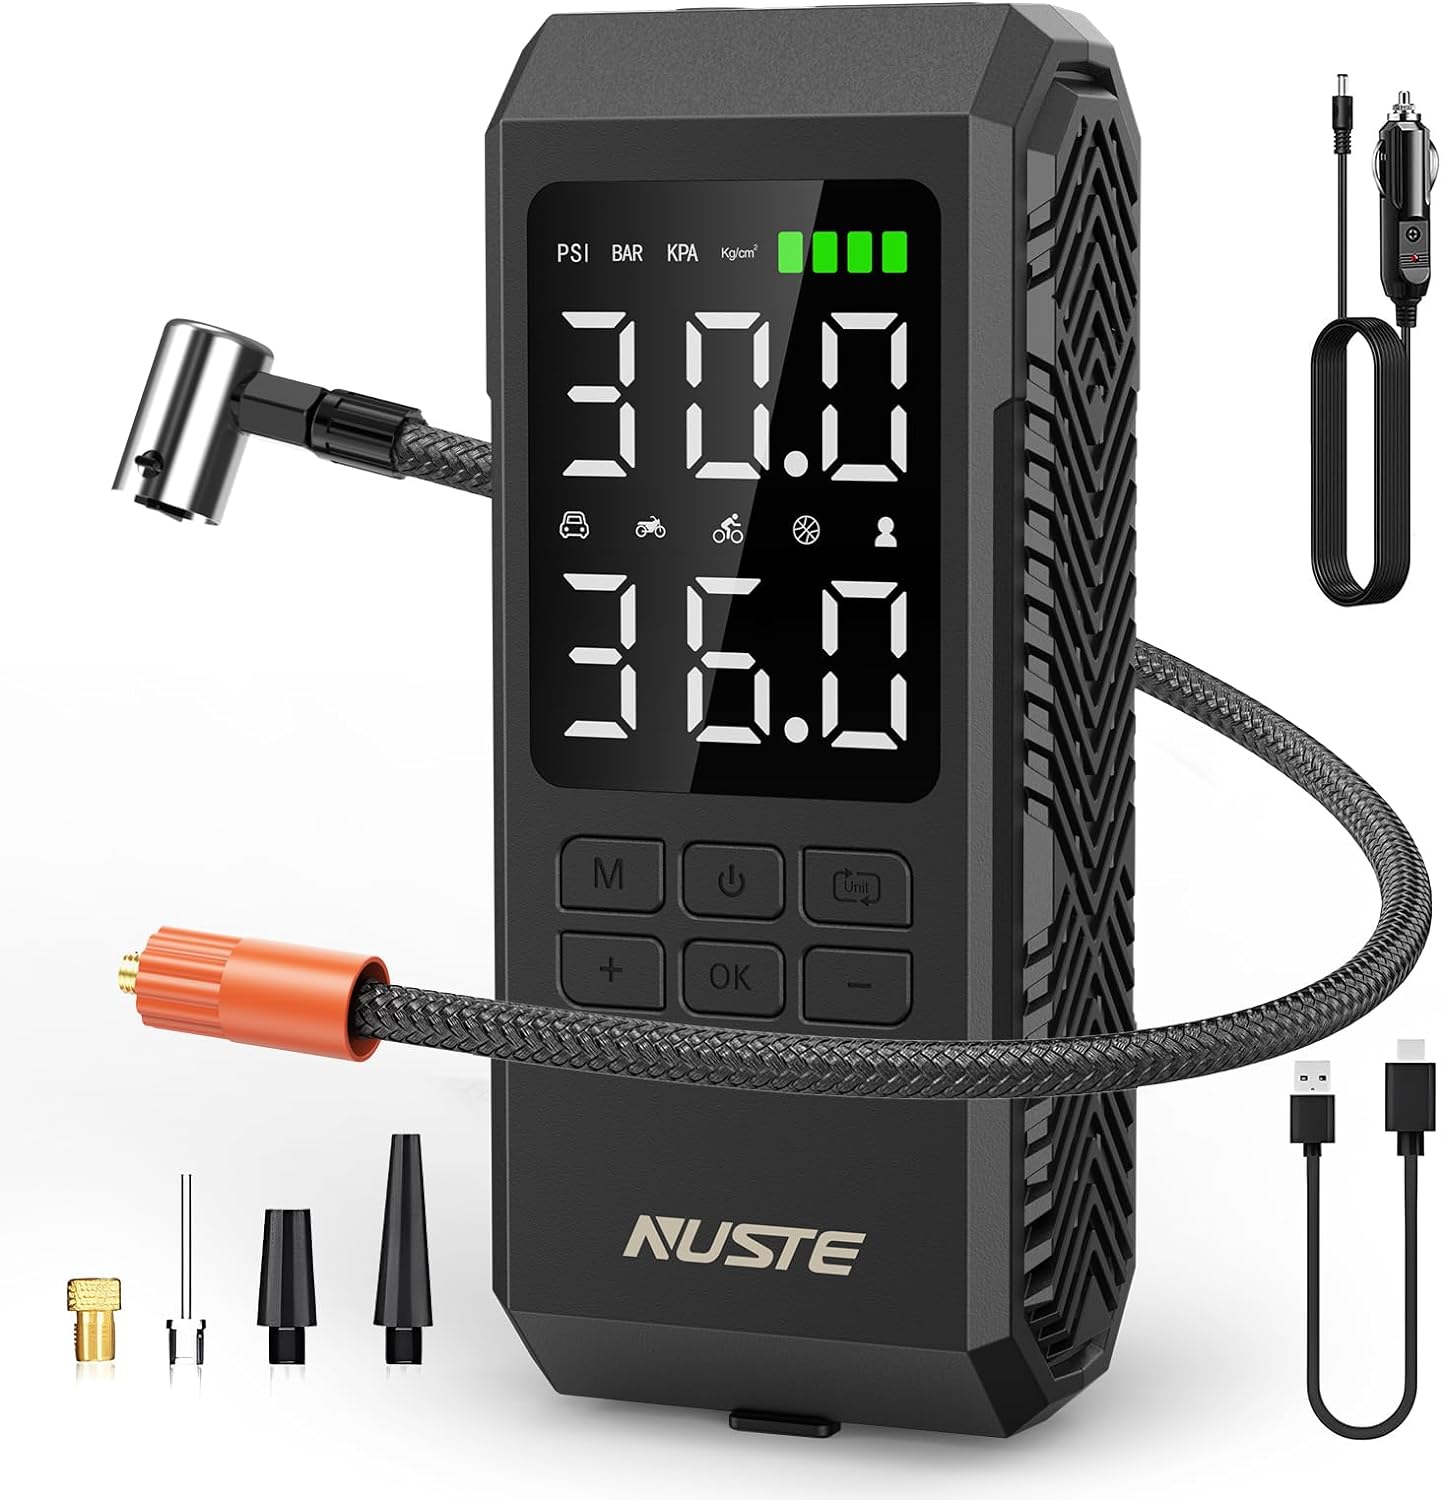 NUSTE Cordless Tire Inflator And Bike Pump